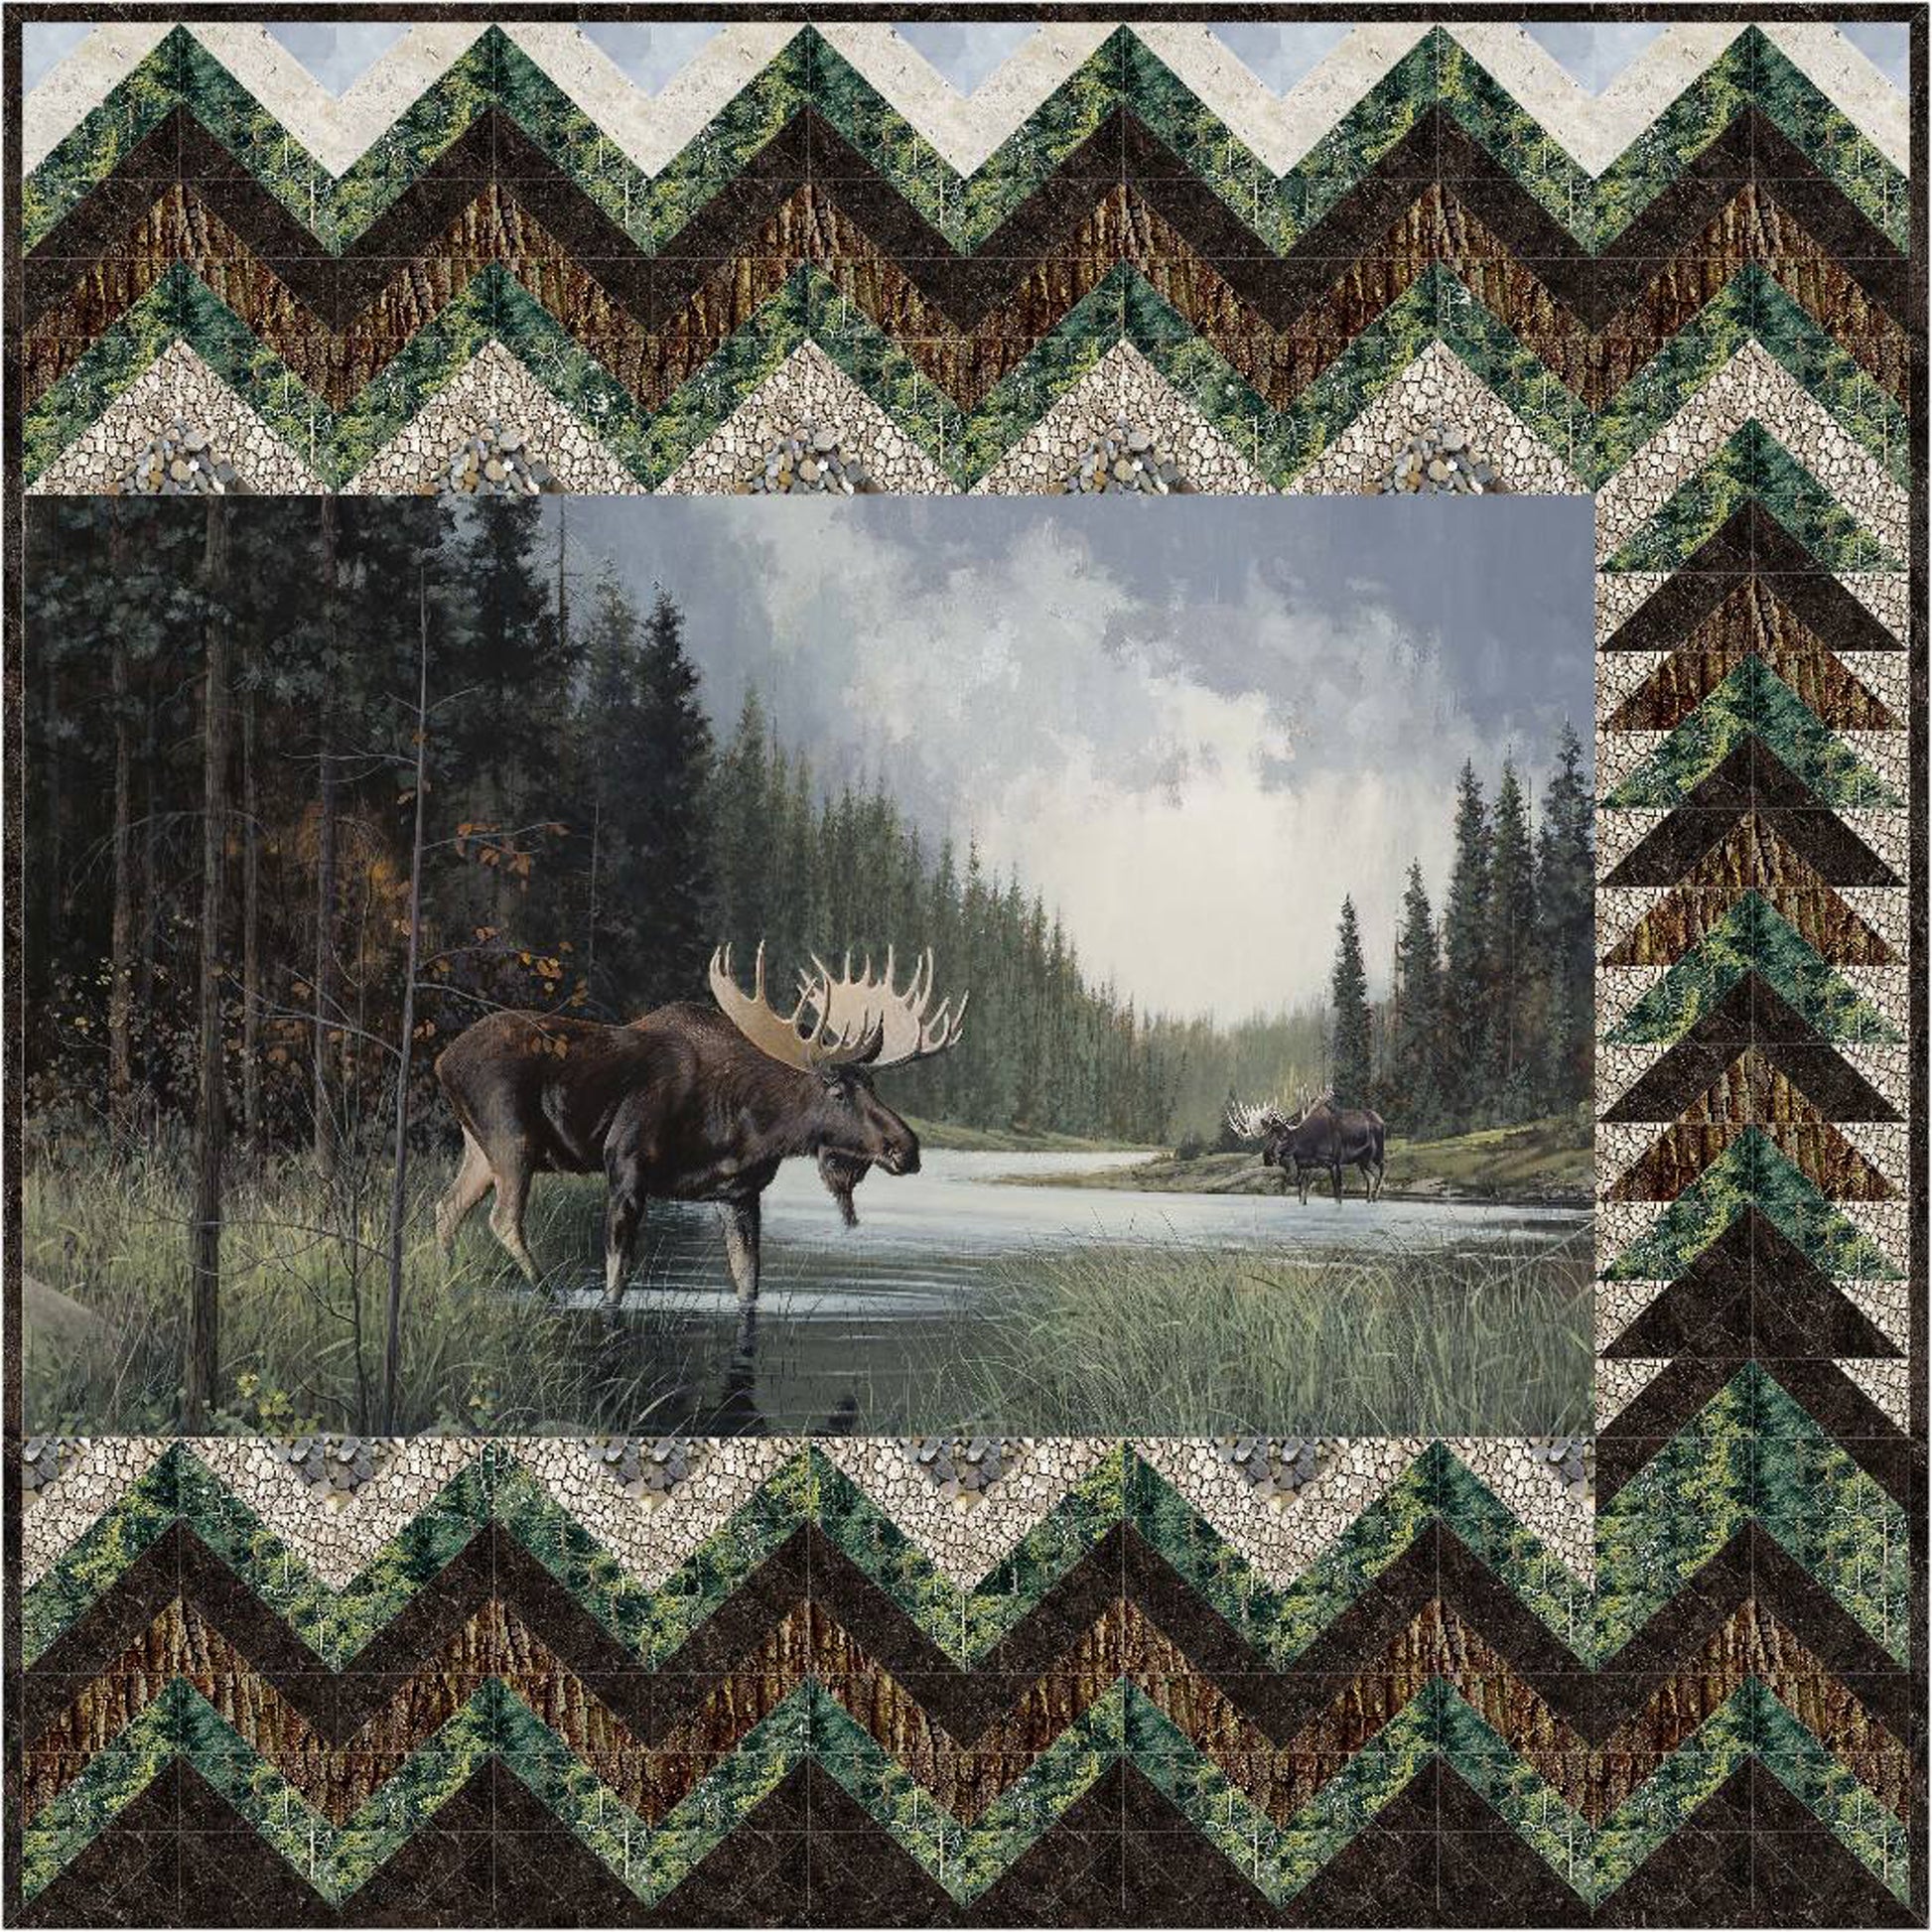 Moose in the woods quilt featuring a majestic moose surrounded by trees and nature-themed patterns, ideal for hunters and those who love the outdoors.